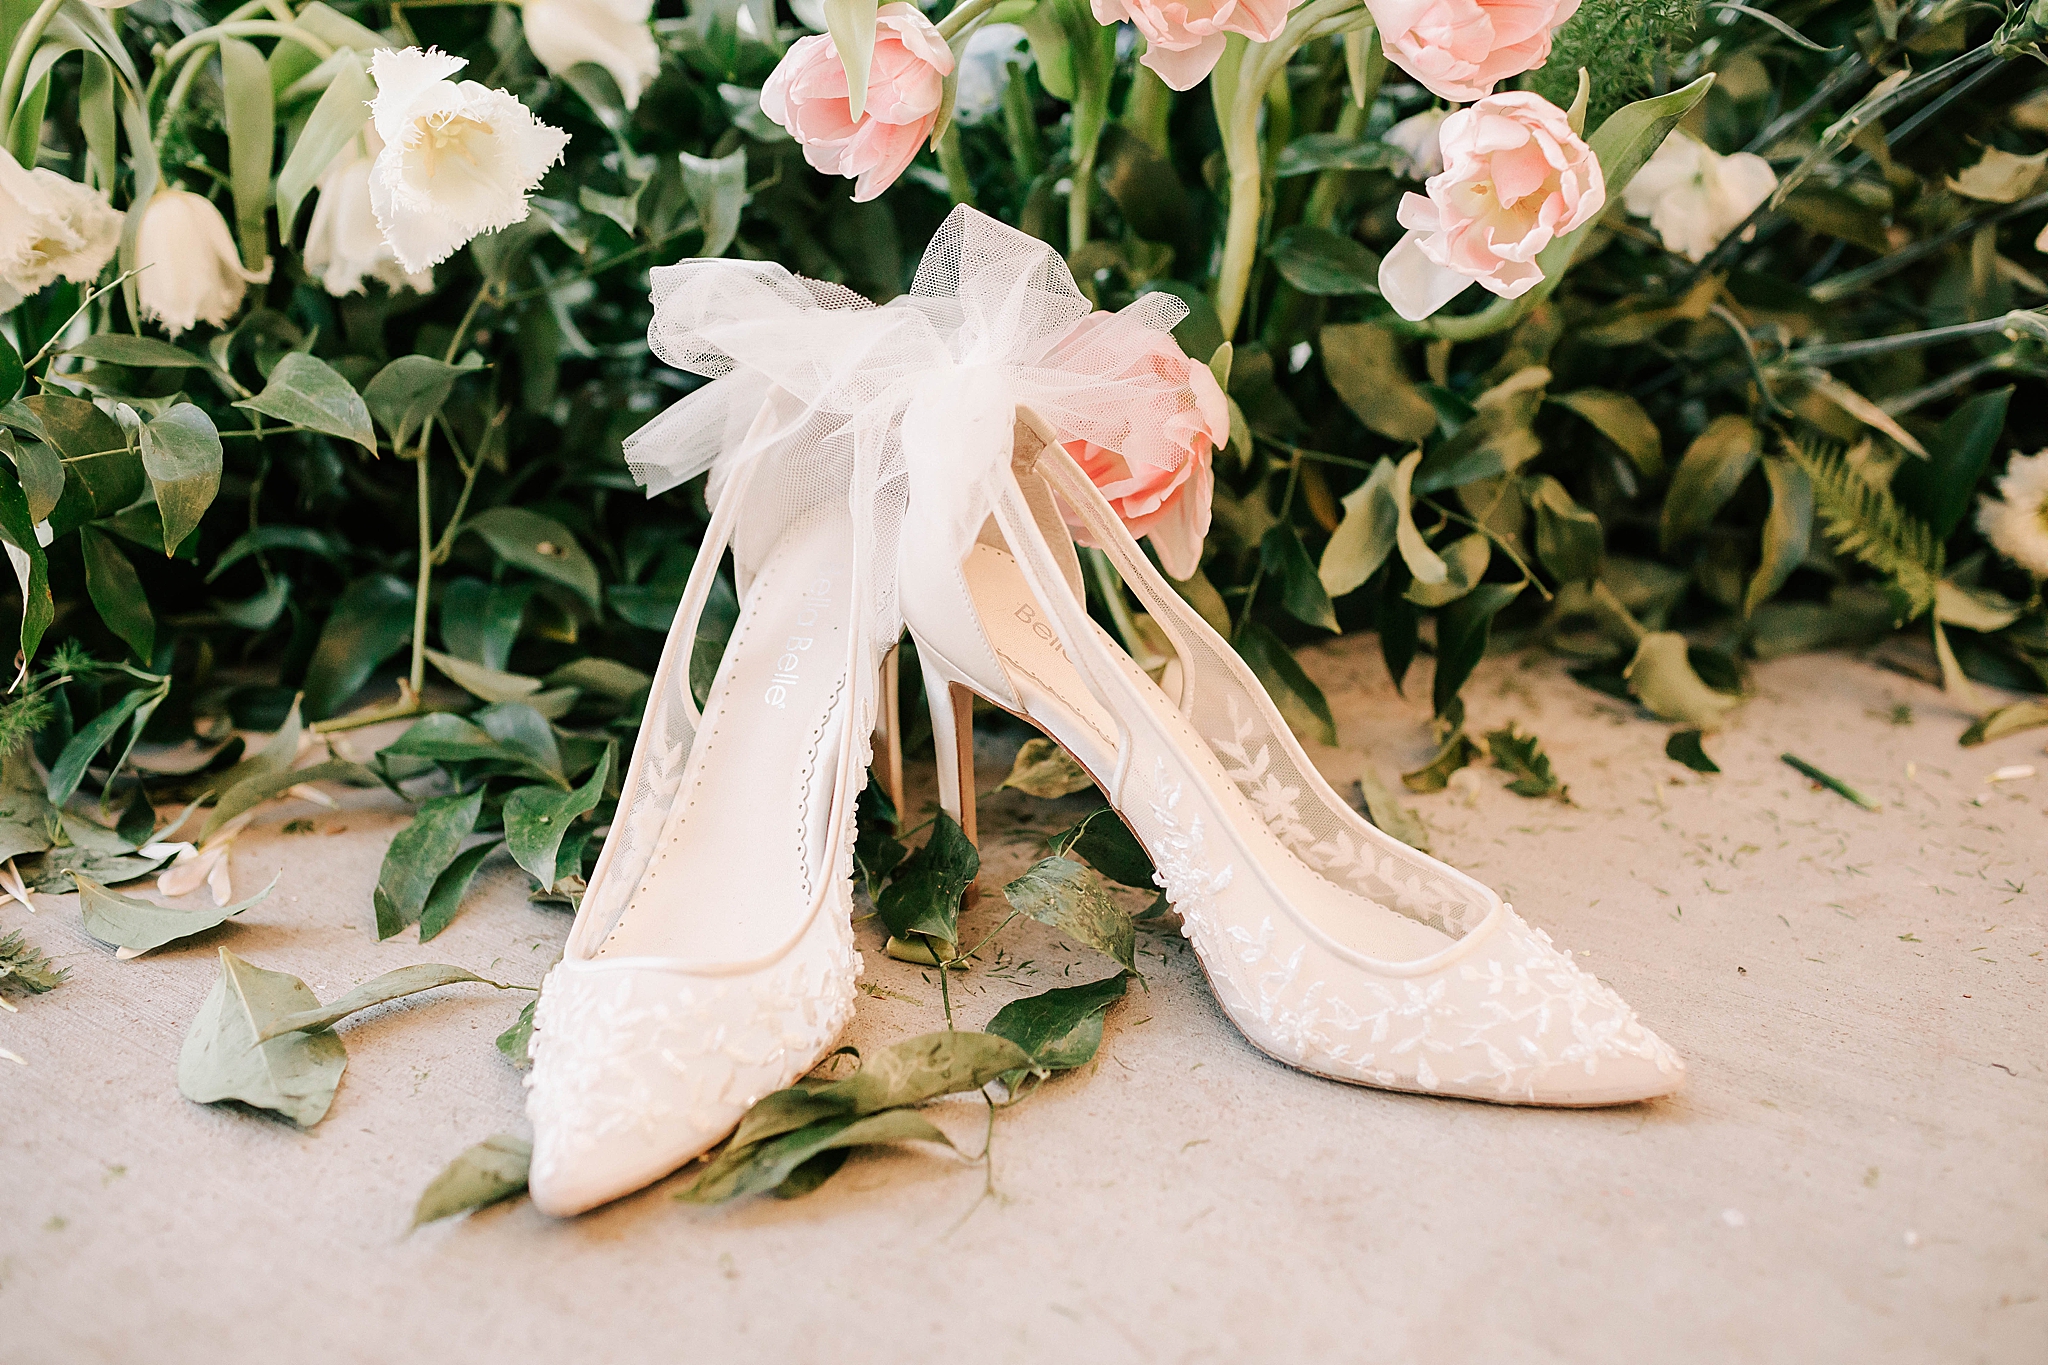 wedding day shoes next to flowers taken by wyoming wedding photographer adrian wayment photo